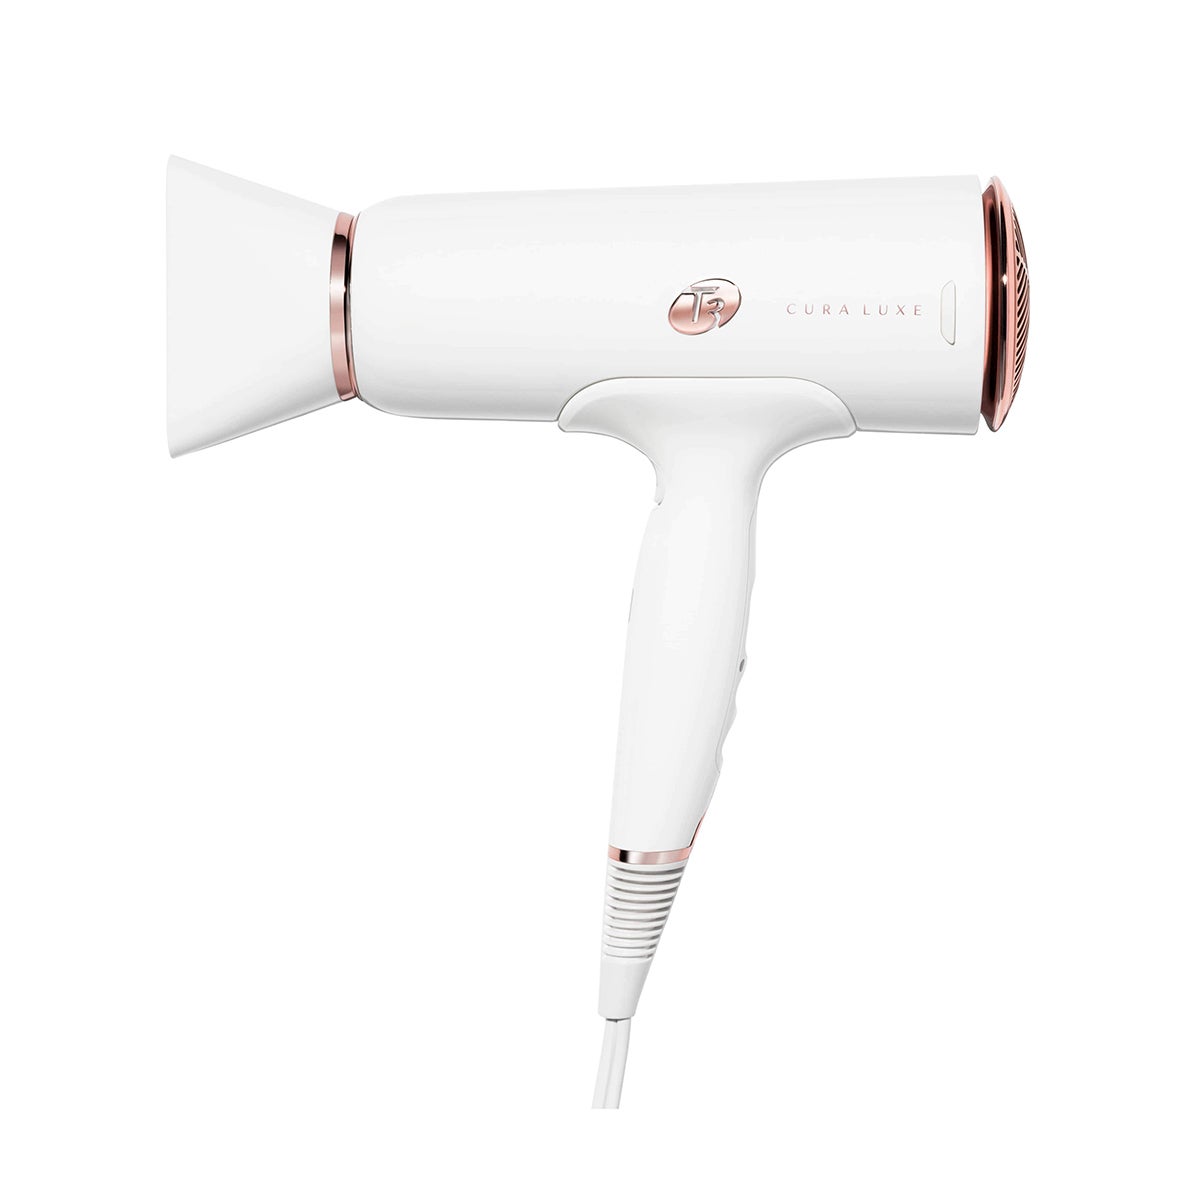 T3 Curaluxe Professional Ionic Hair Dryer with Auto Pause Sensor